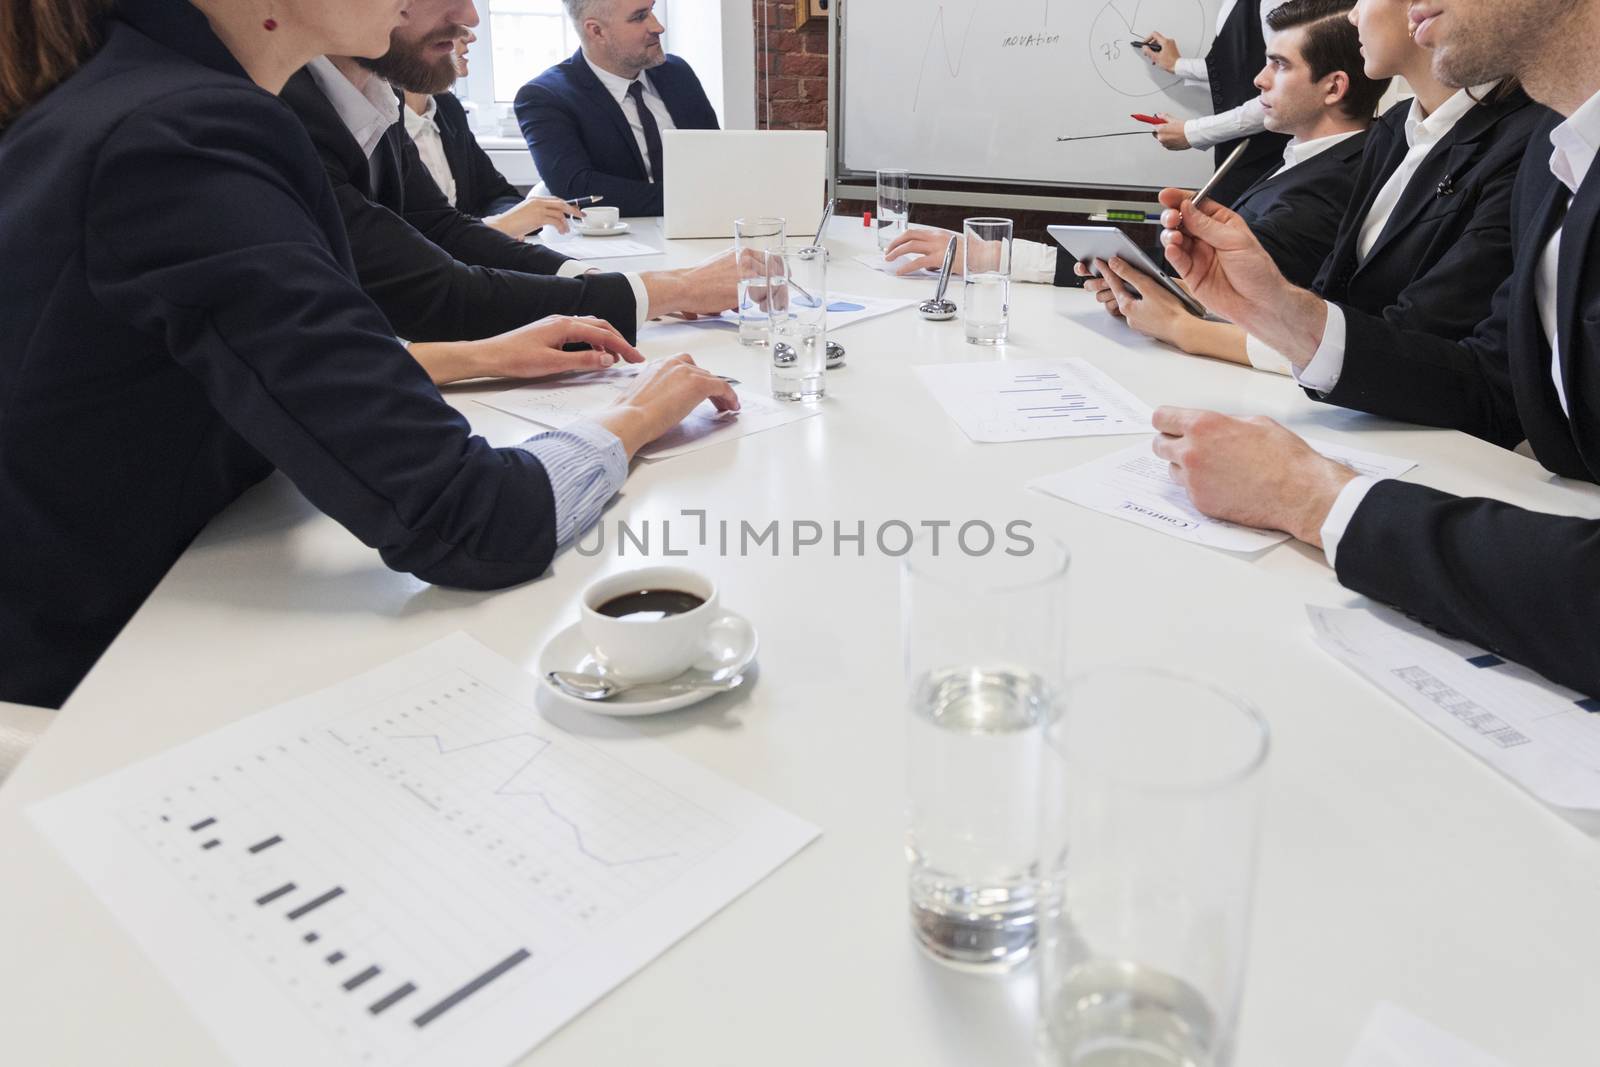 Business people at meeting table work with documents and financial data together